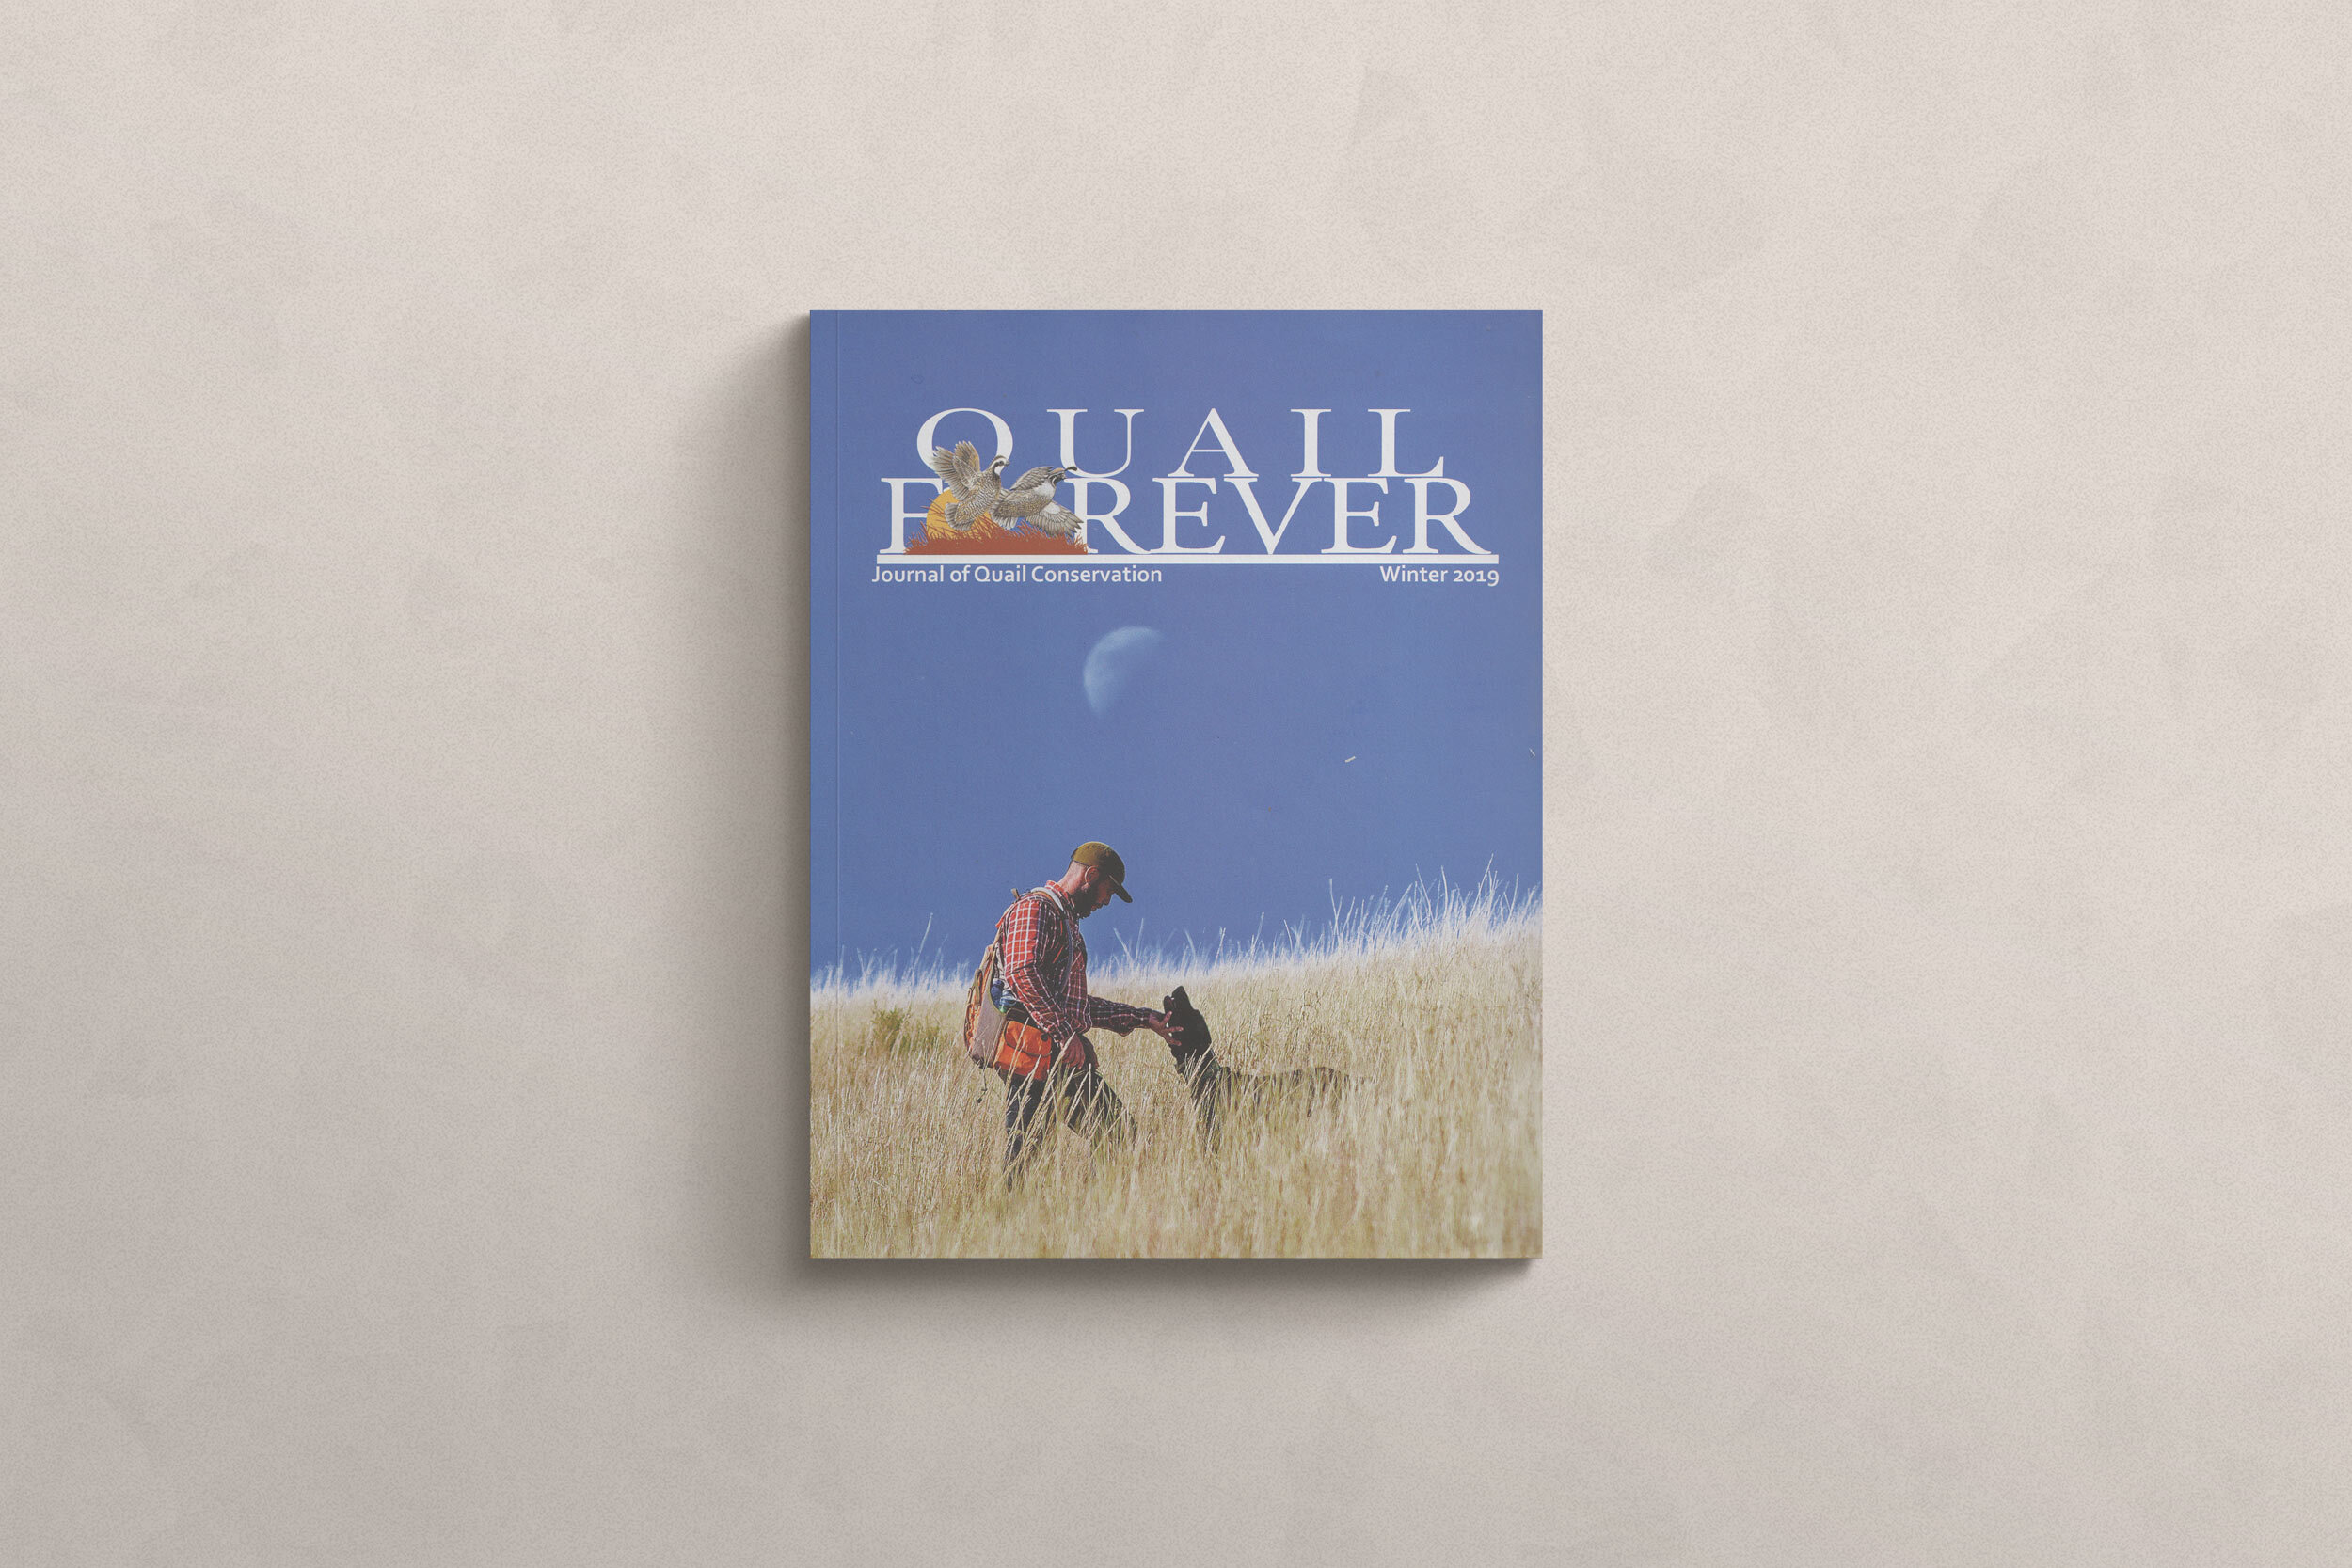 Feathers-and-Followers-in-Quail-Review-by-Reid-Bryant---cover.jpg